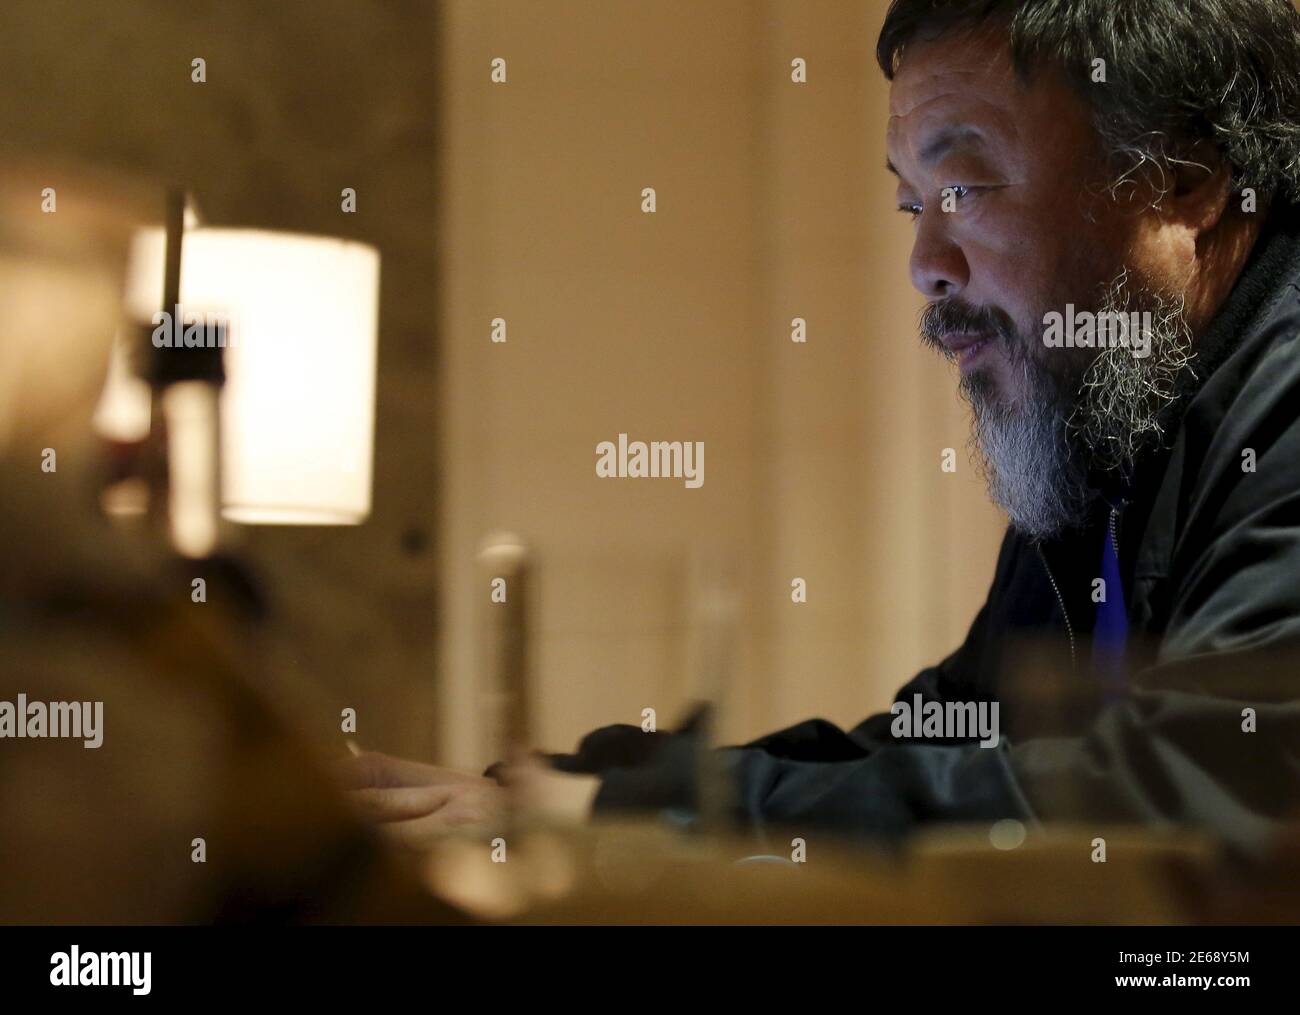 Dissident Chinese artist Ai Weiwei uses his laptop after an interview with Reuters at the hotel he is staying at in Beijing, March 24, 2015. Amnesty International has given its top 2015 human rights award to both Chinese dissident artist Ai Weiwei, a fierce critic of Beijing who has been banned from leaving China after an 81-day detention in 2011, and U.S. folksinger Joan Baez.   REUTERS/Kim Kyung-Hoon Stock Photo